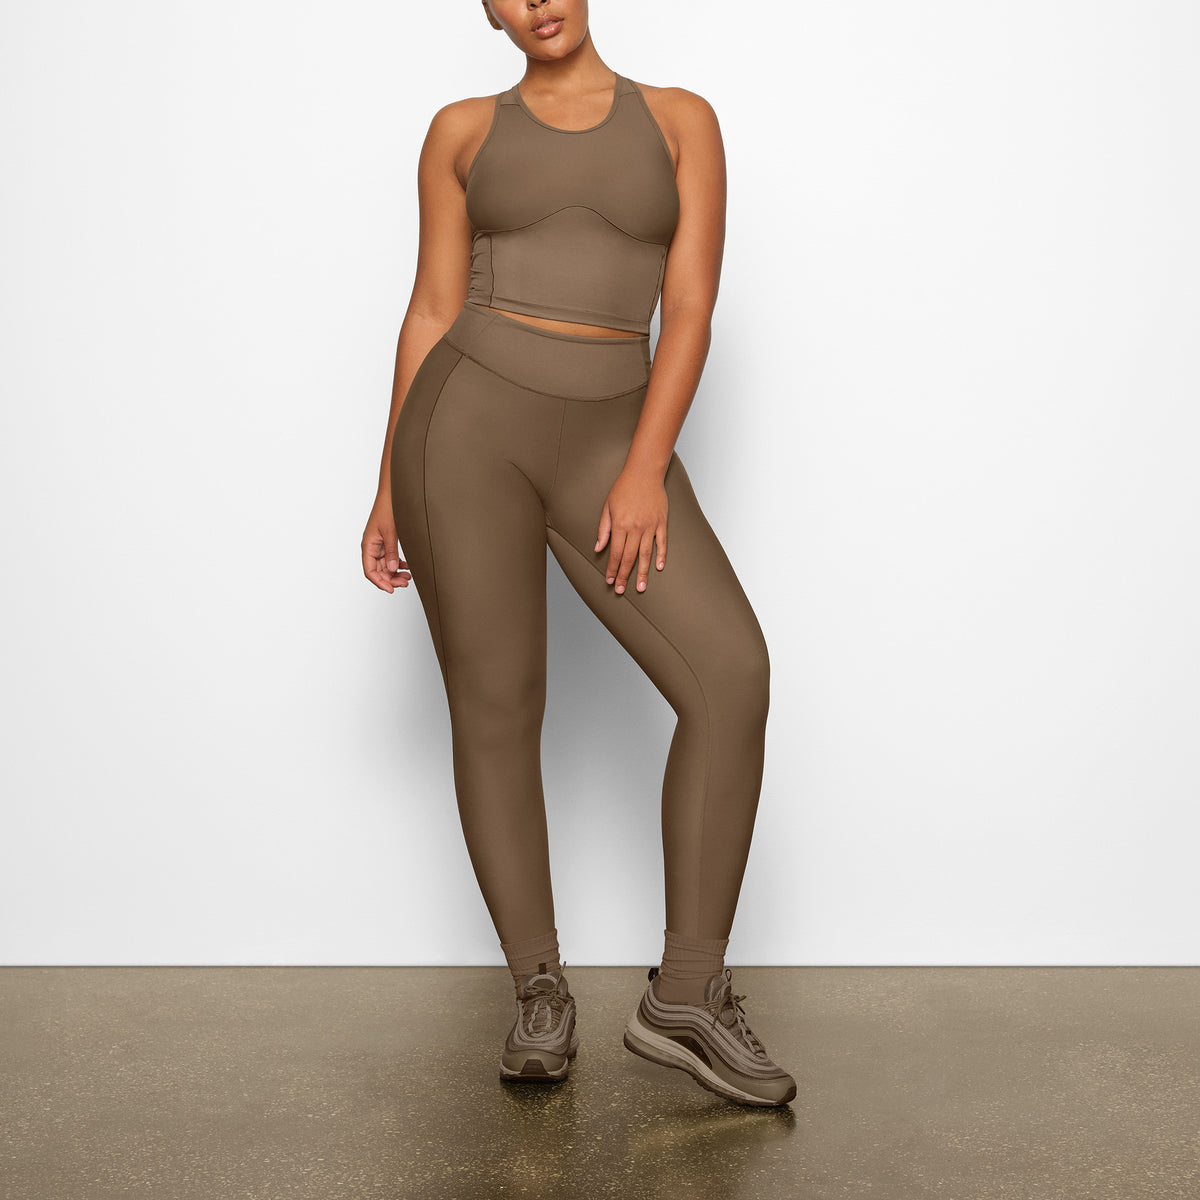 Are Compression Leggings Good For Long Flights? – solowomen